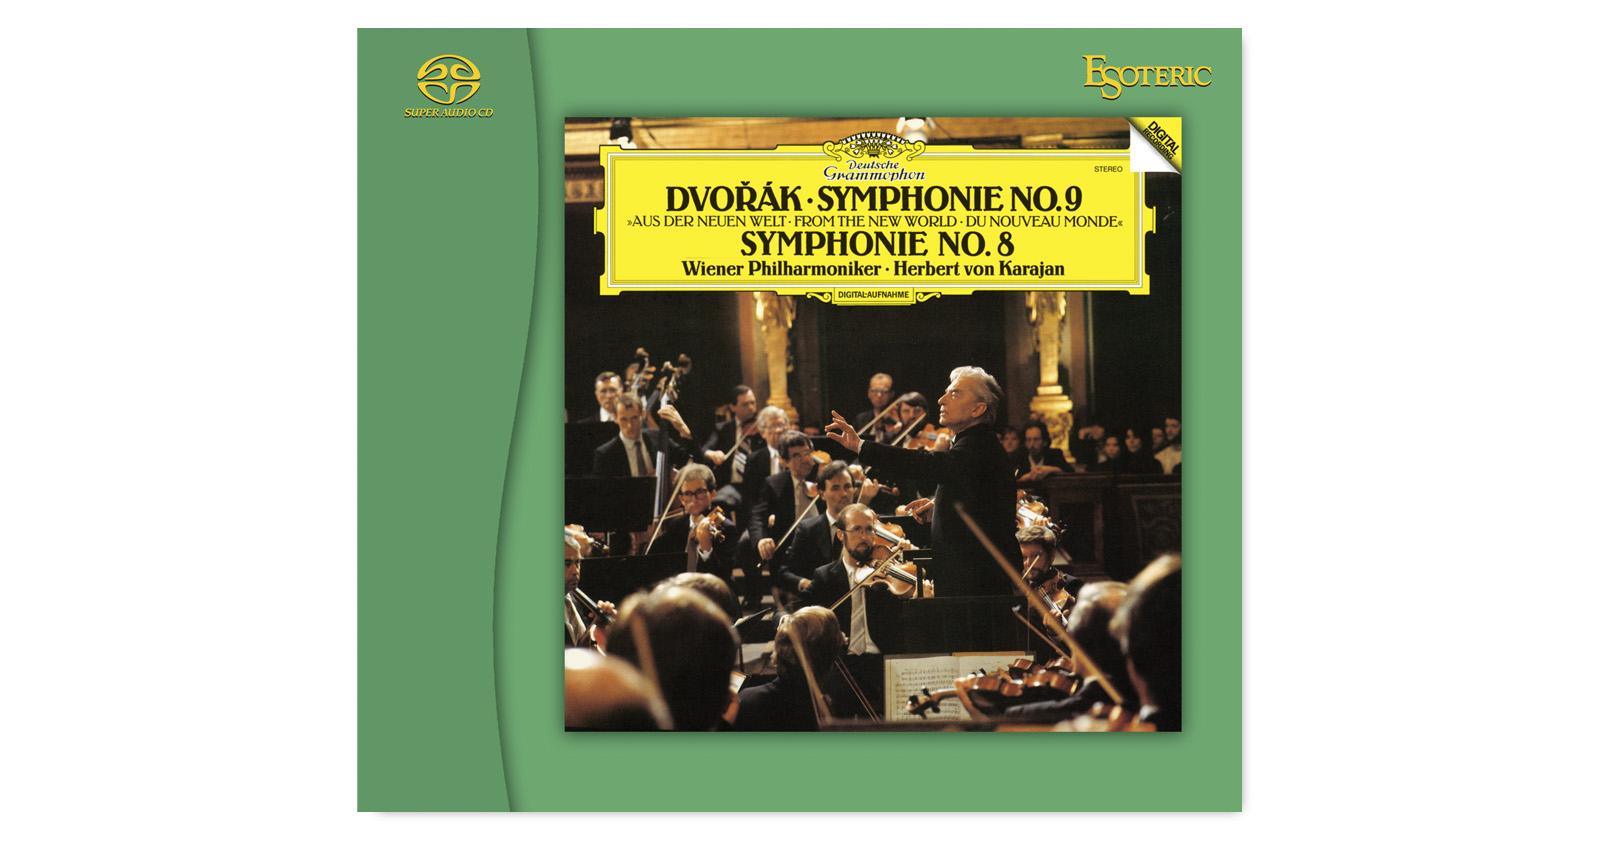 DVOŘÁK Symphonies Nos. 8 & 9 “From the New World"